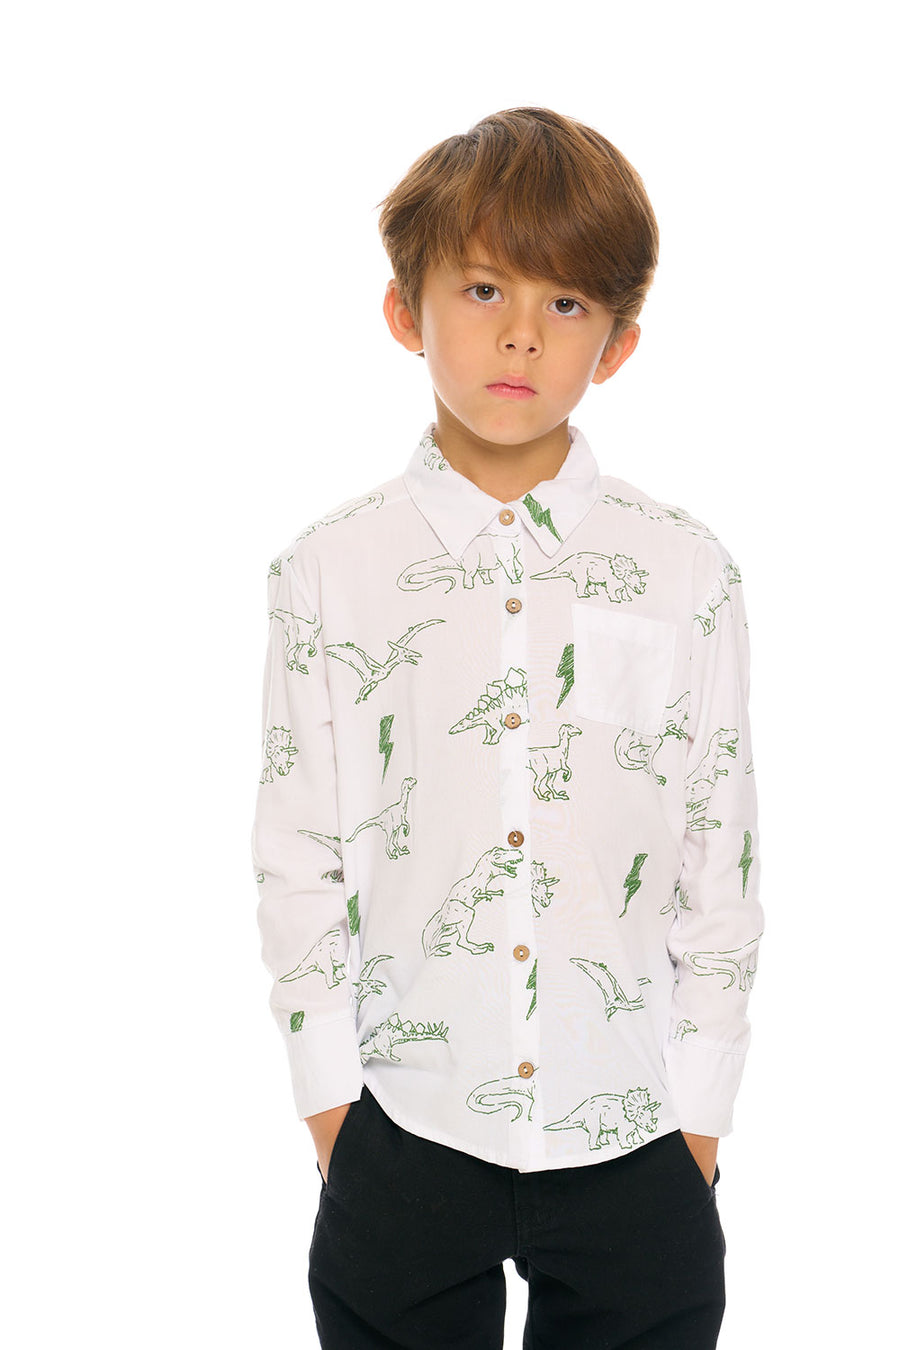 Dino Button Down BOYS chaserbrand